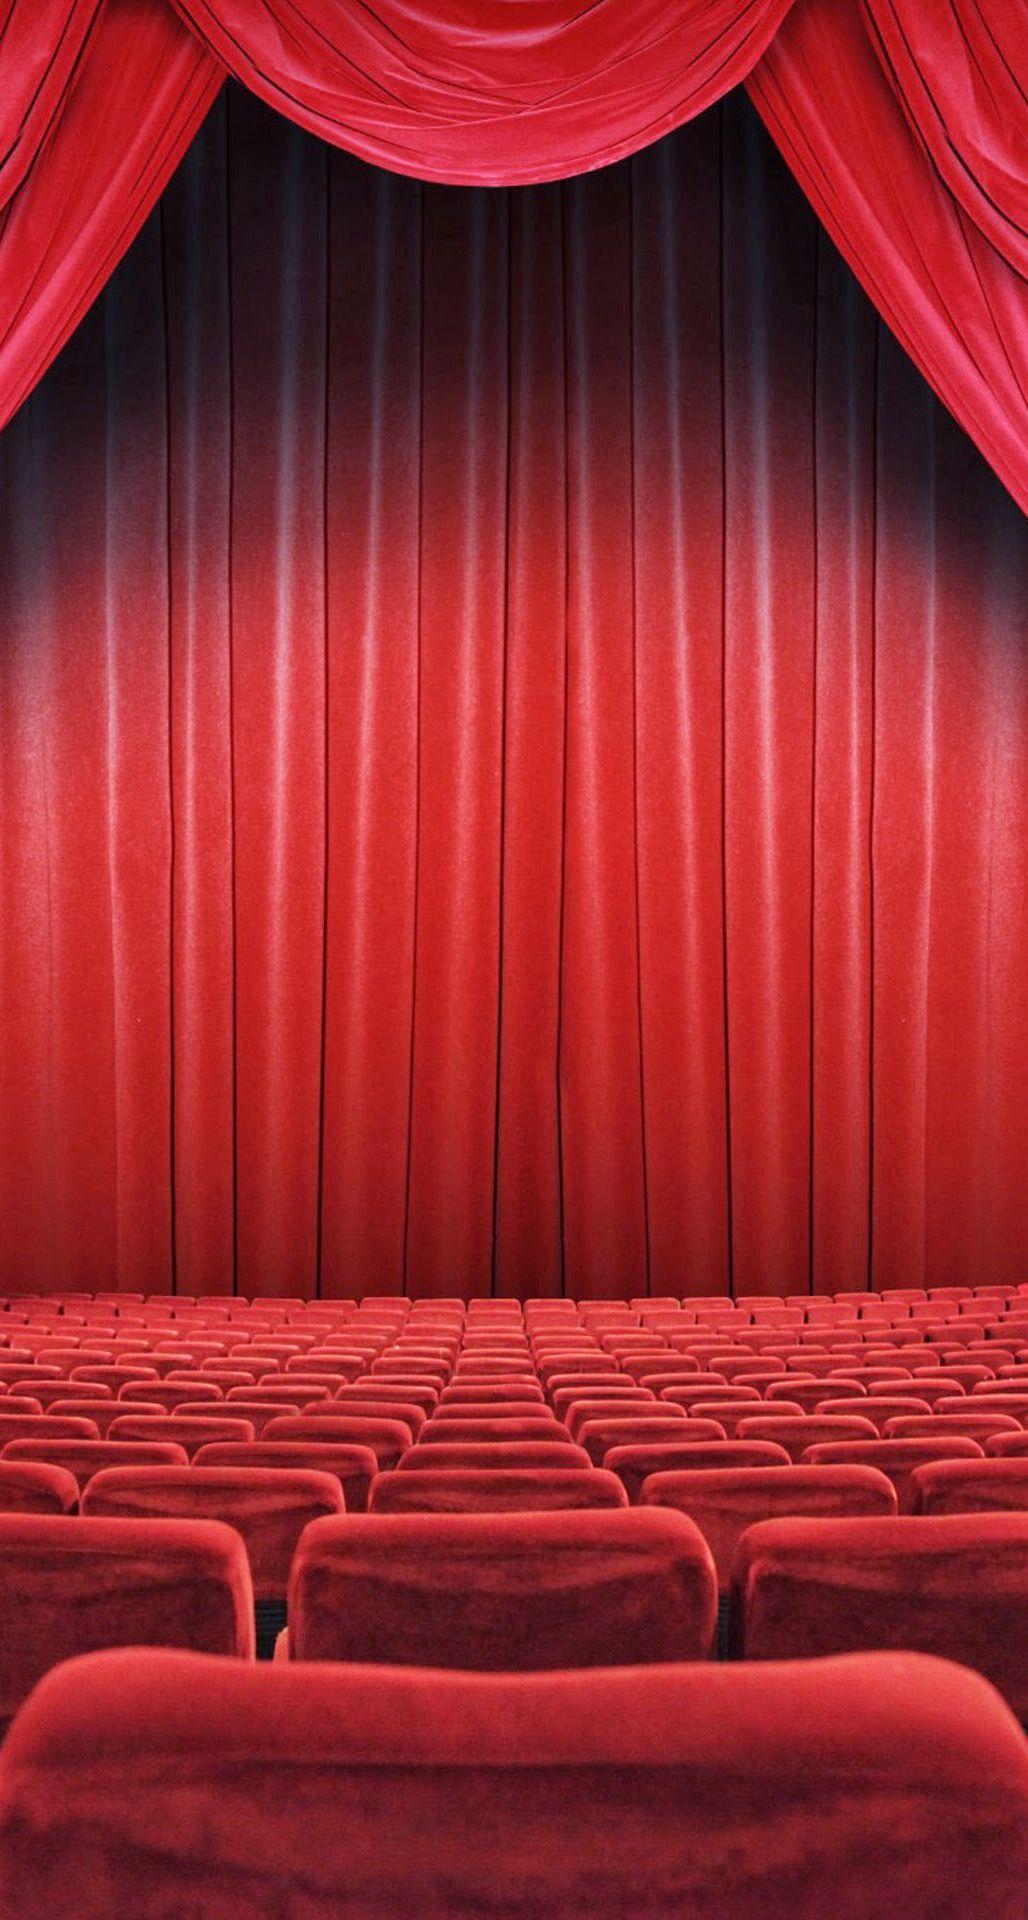 Theatre Seats Red Curtain iPhone 6 Plus HD 028